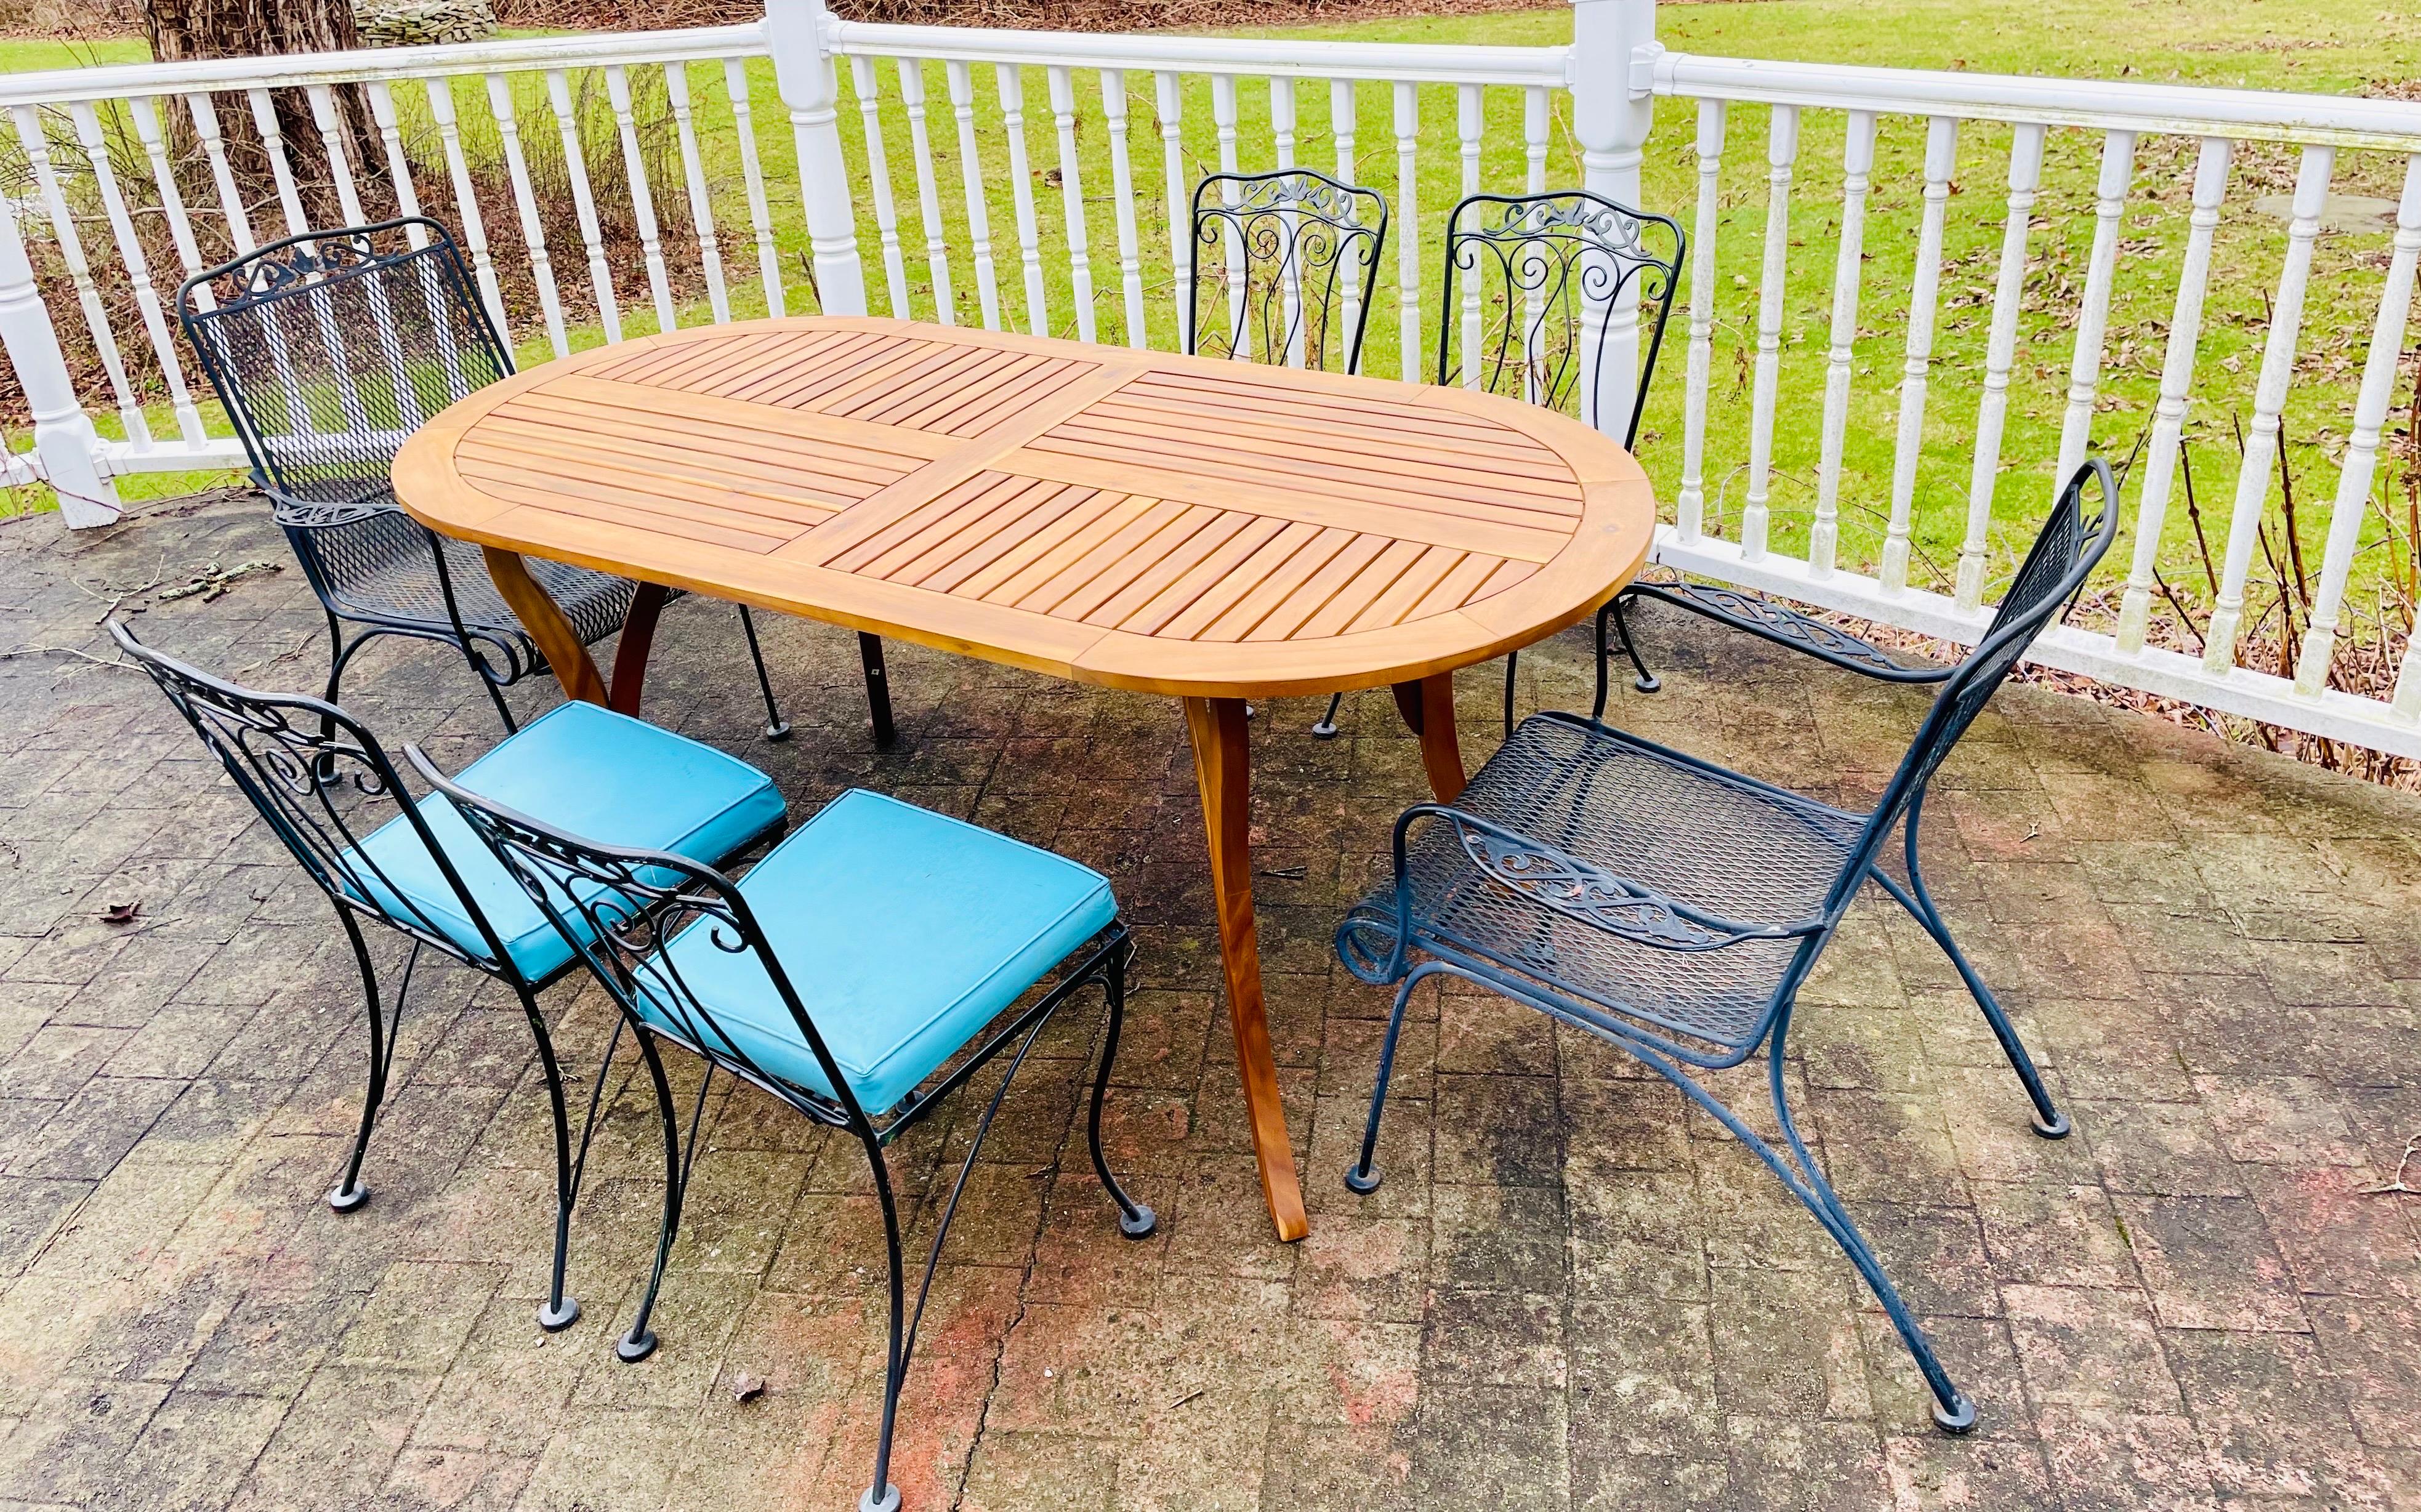 Vintage wrought iron patio furniture seating chairs with teak table

No matter what your style – mid century modern, rustic, traditional, or farmhouse– you can create this stylish and trending look by mixing wood and metal. 

This set features 6